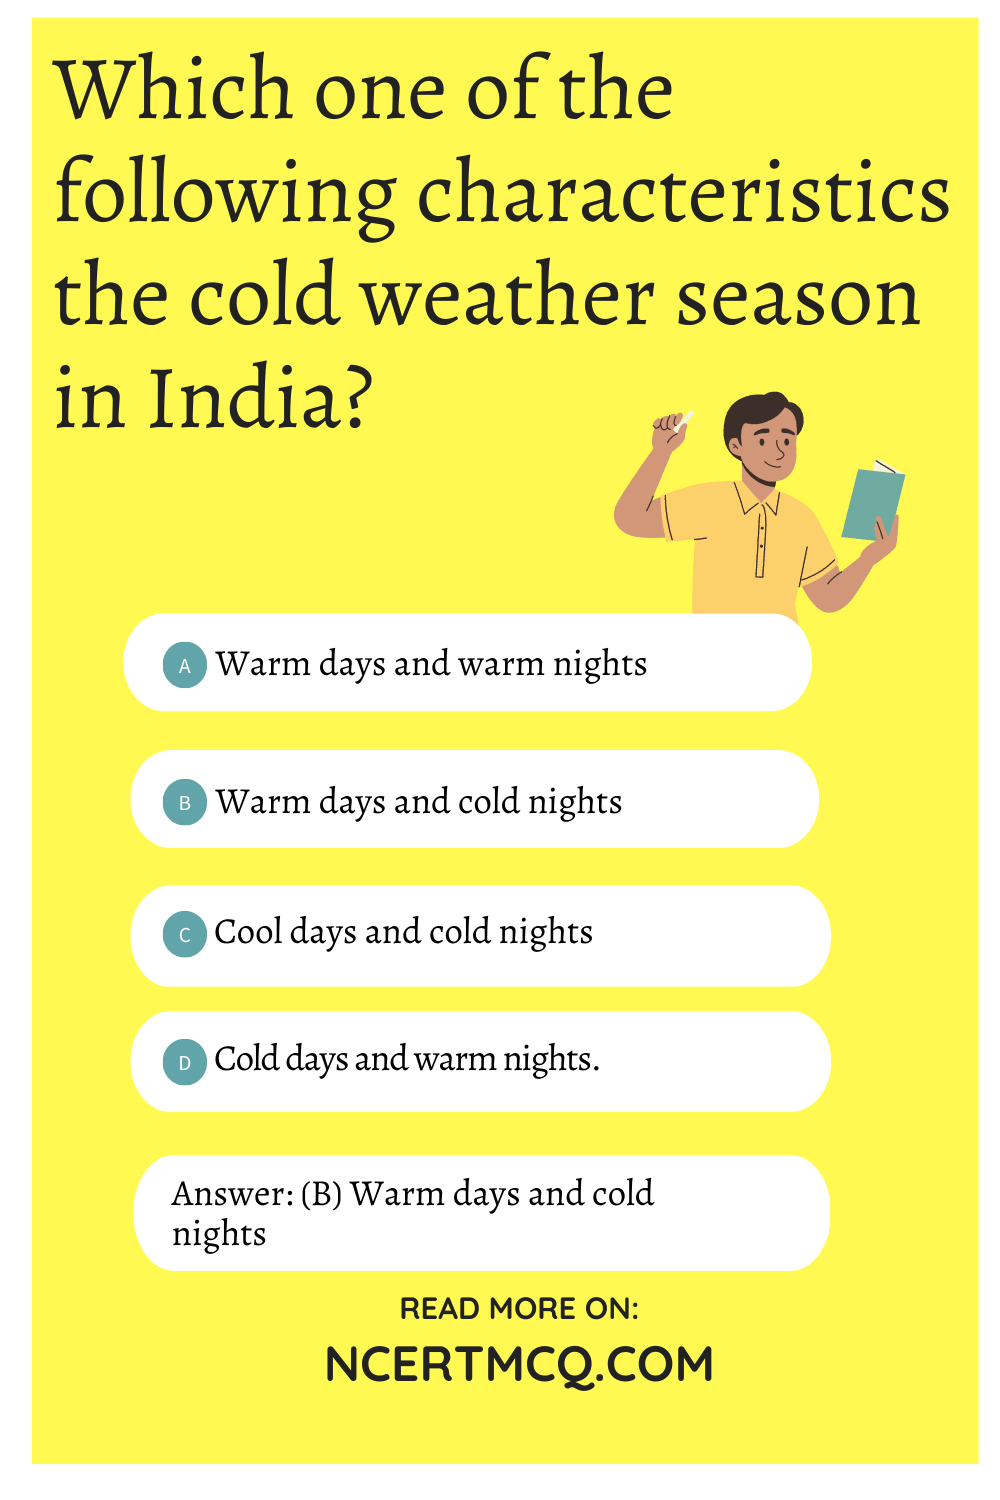 Which one of the following characteristics the cold weather season in India?